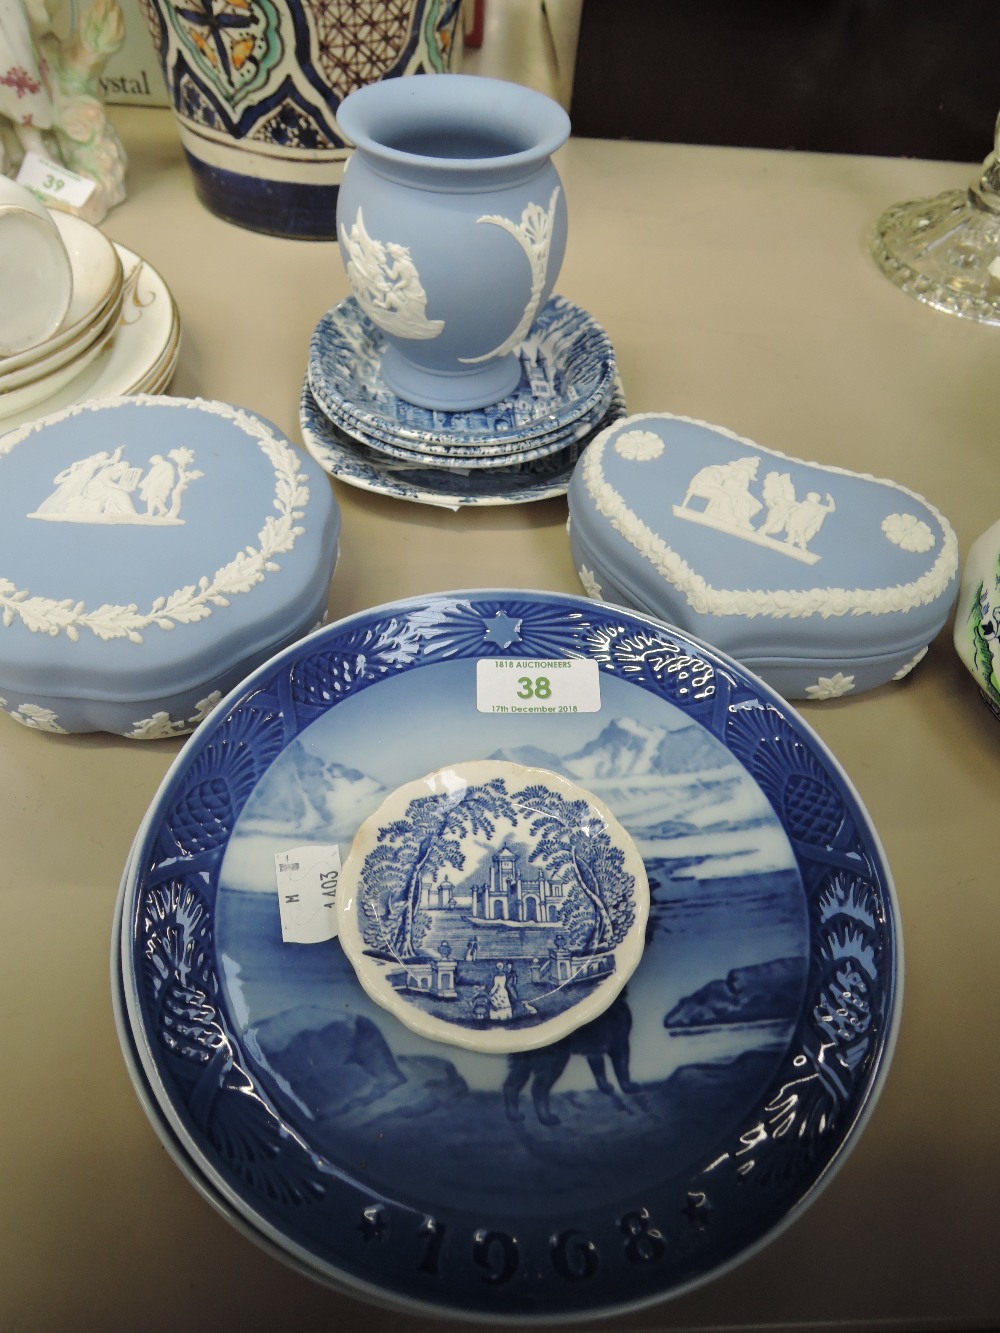 A selection of blue and white ware ceramics including Wedgwood Jasperware